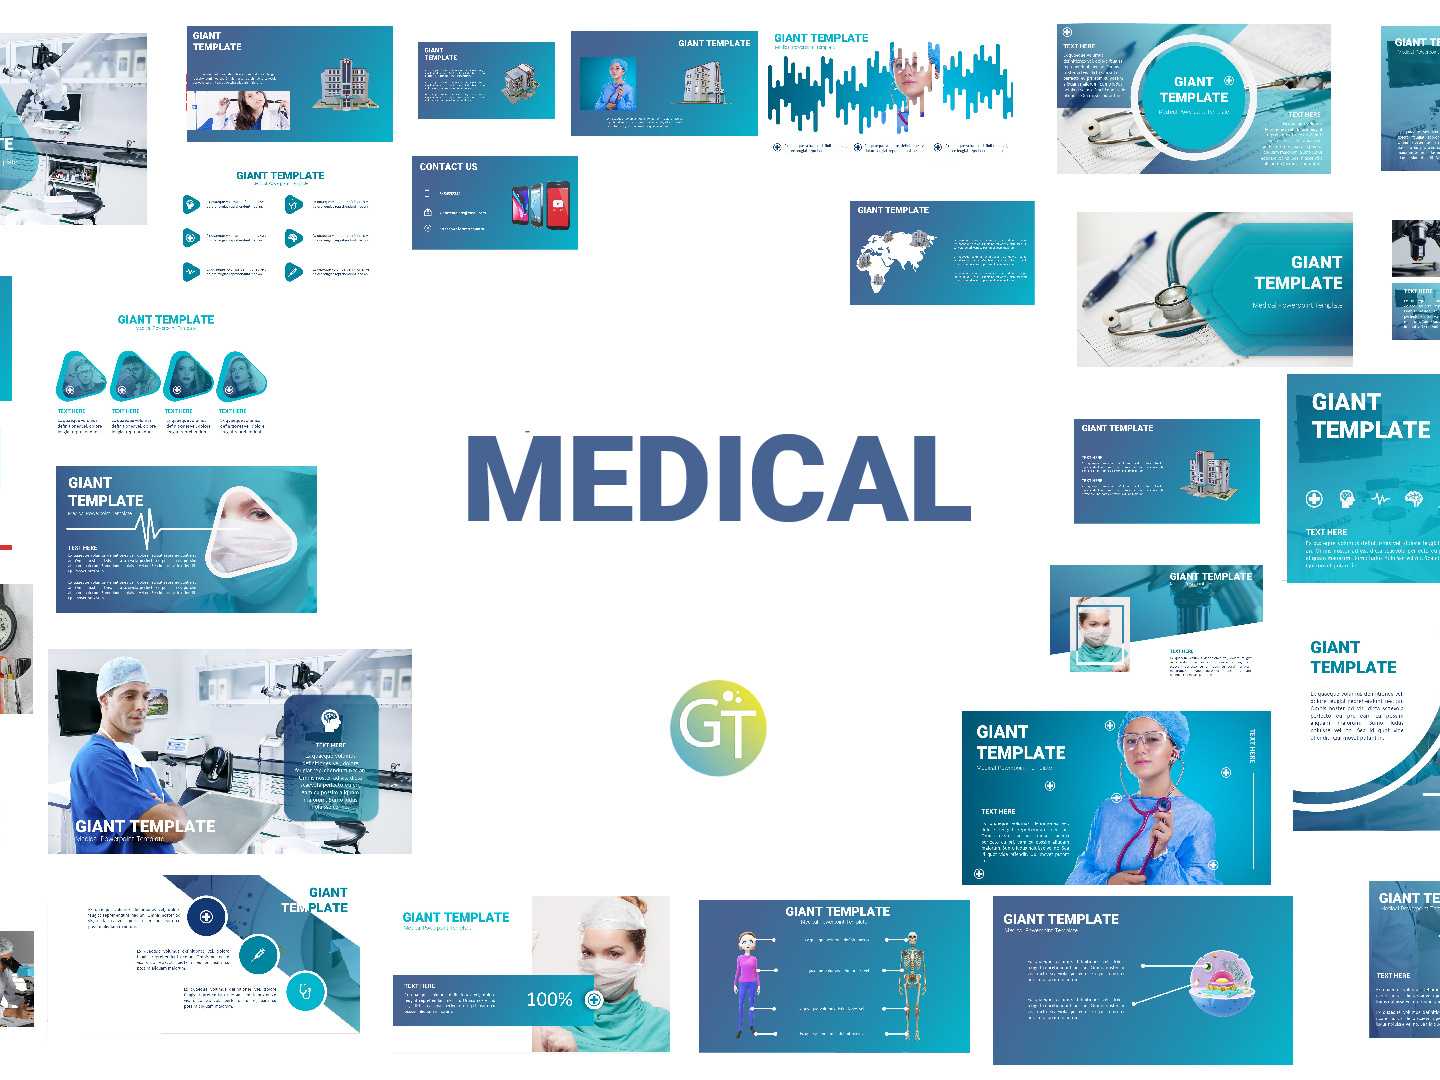 Medical Powerpoint Templates Free Downloadgiant Template Pertaining To Free Powerpoint Presentation Templates Downloads